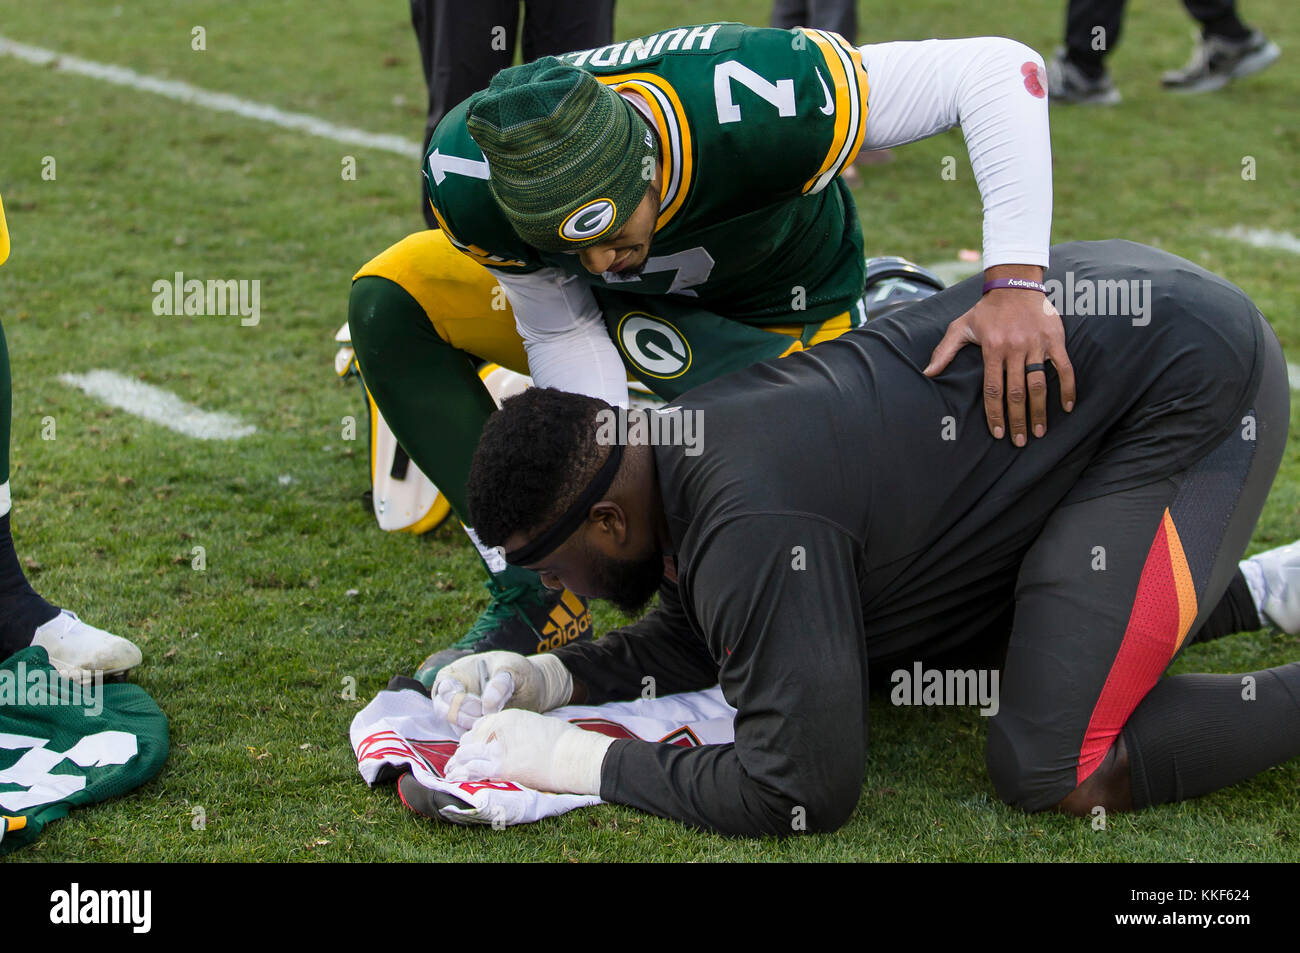 December 3, 2017: Green Bay Packers quarterback Brett Hundley #7 talks with Tampa Bay Buccaneers offensive guard Caleb Benenoch #77 after the NFL Football game between the Tampa Bay Buccaneers and the Green Bay Packers at Lambeau Field in Green Bay, WI. Packers defeated the Buccaneers in overtime 26-20. John Fisher/CSM Stock Photo